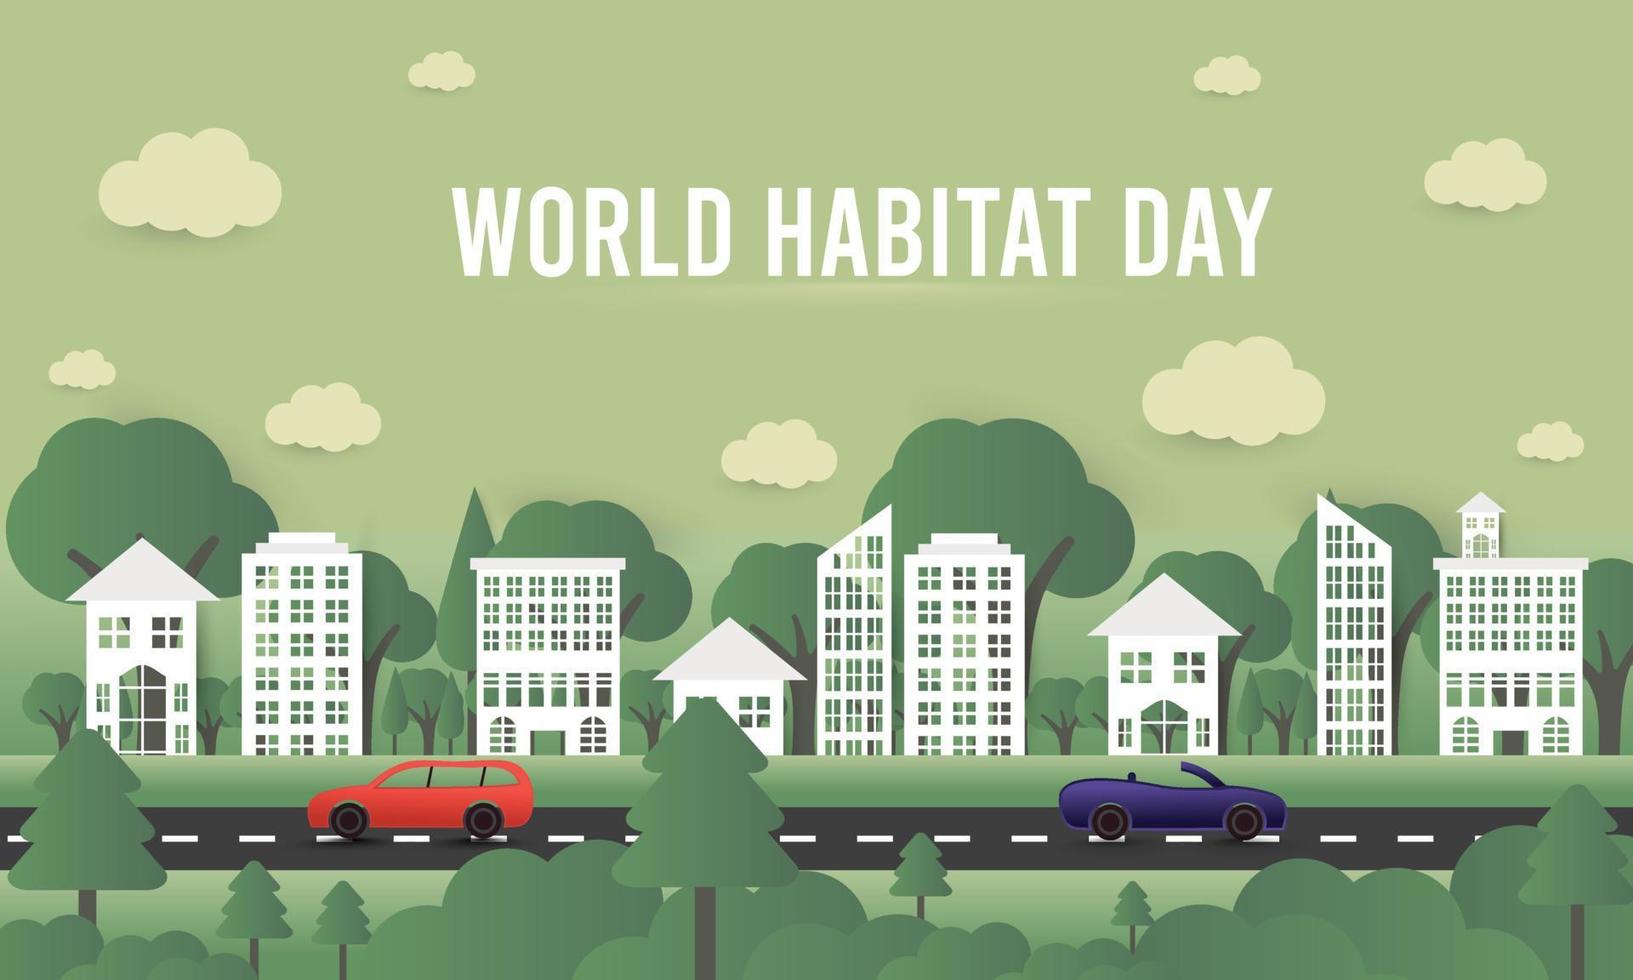 World habitat day flat design background with the clean city, natural tree vector